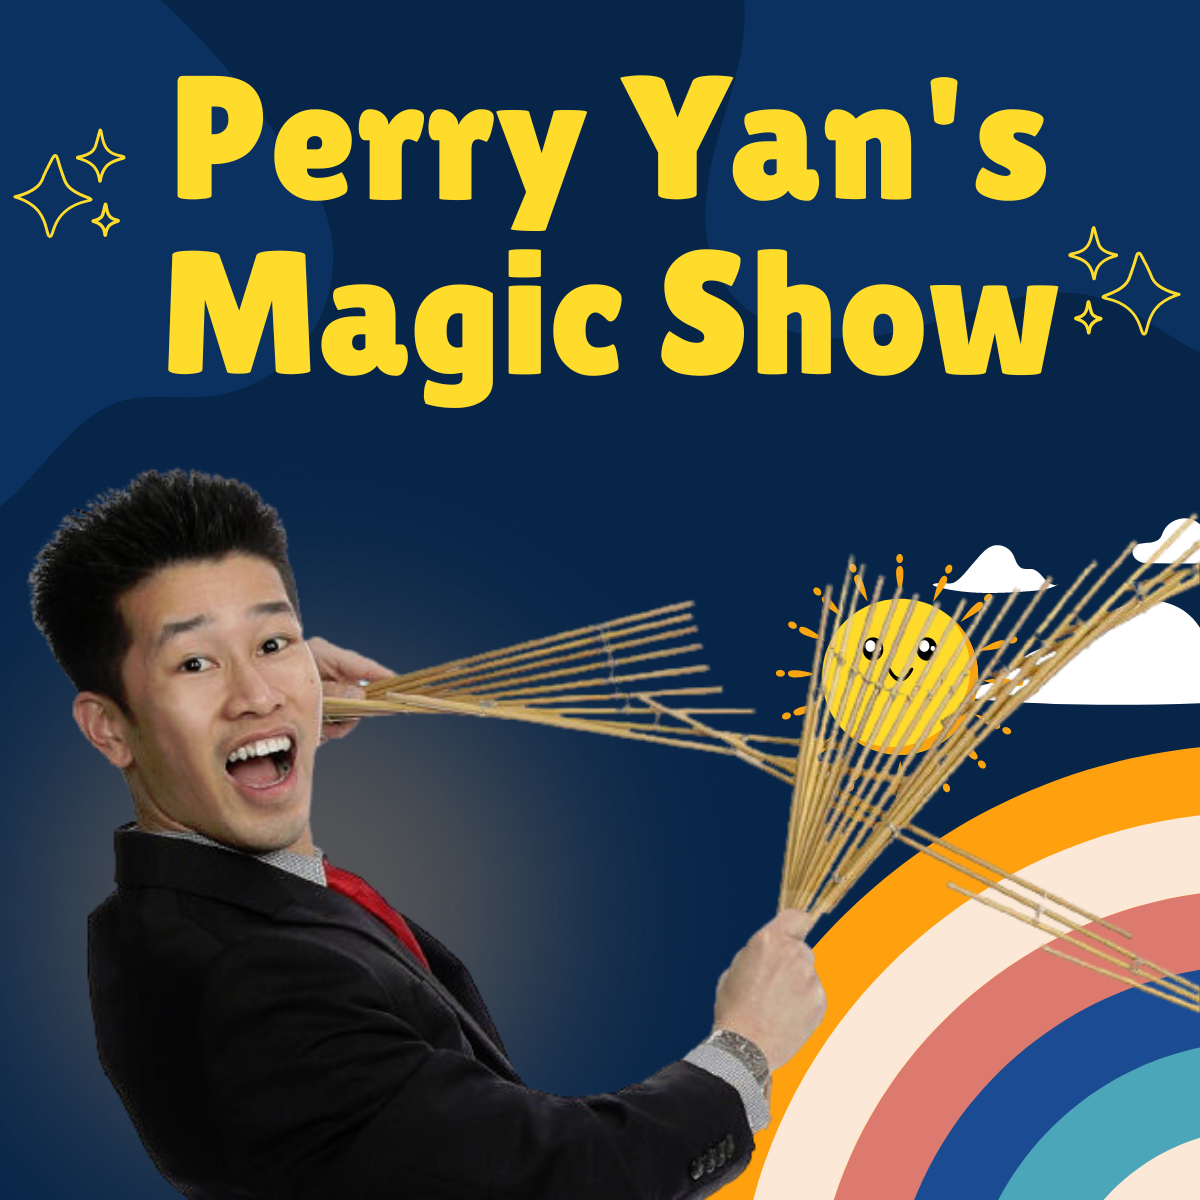 dark blue background, rainbow on bottom corner with sun and clouds. Yellow text sats Perry Yan's Magic show with a picture of perry yan in bottom left hand corner